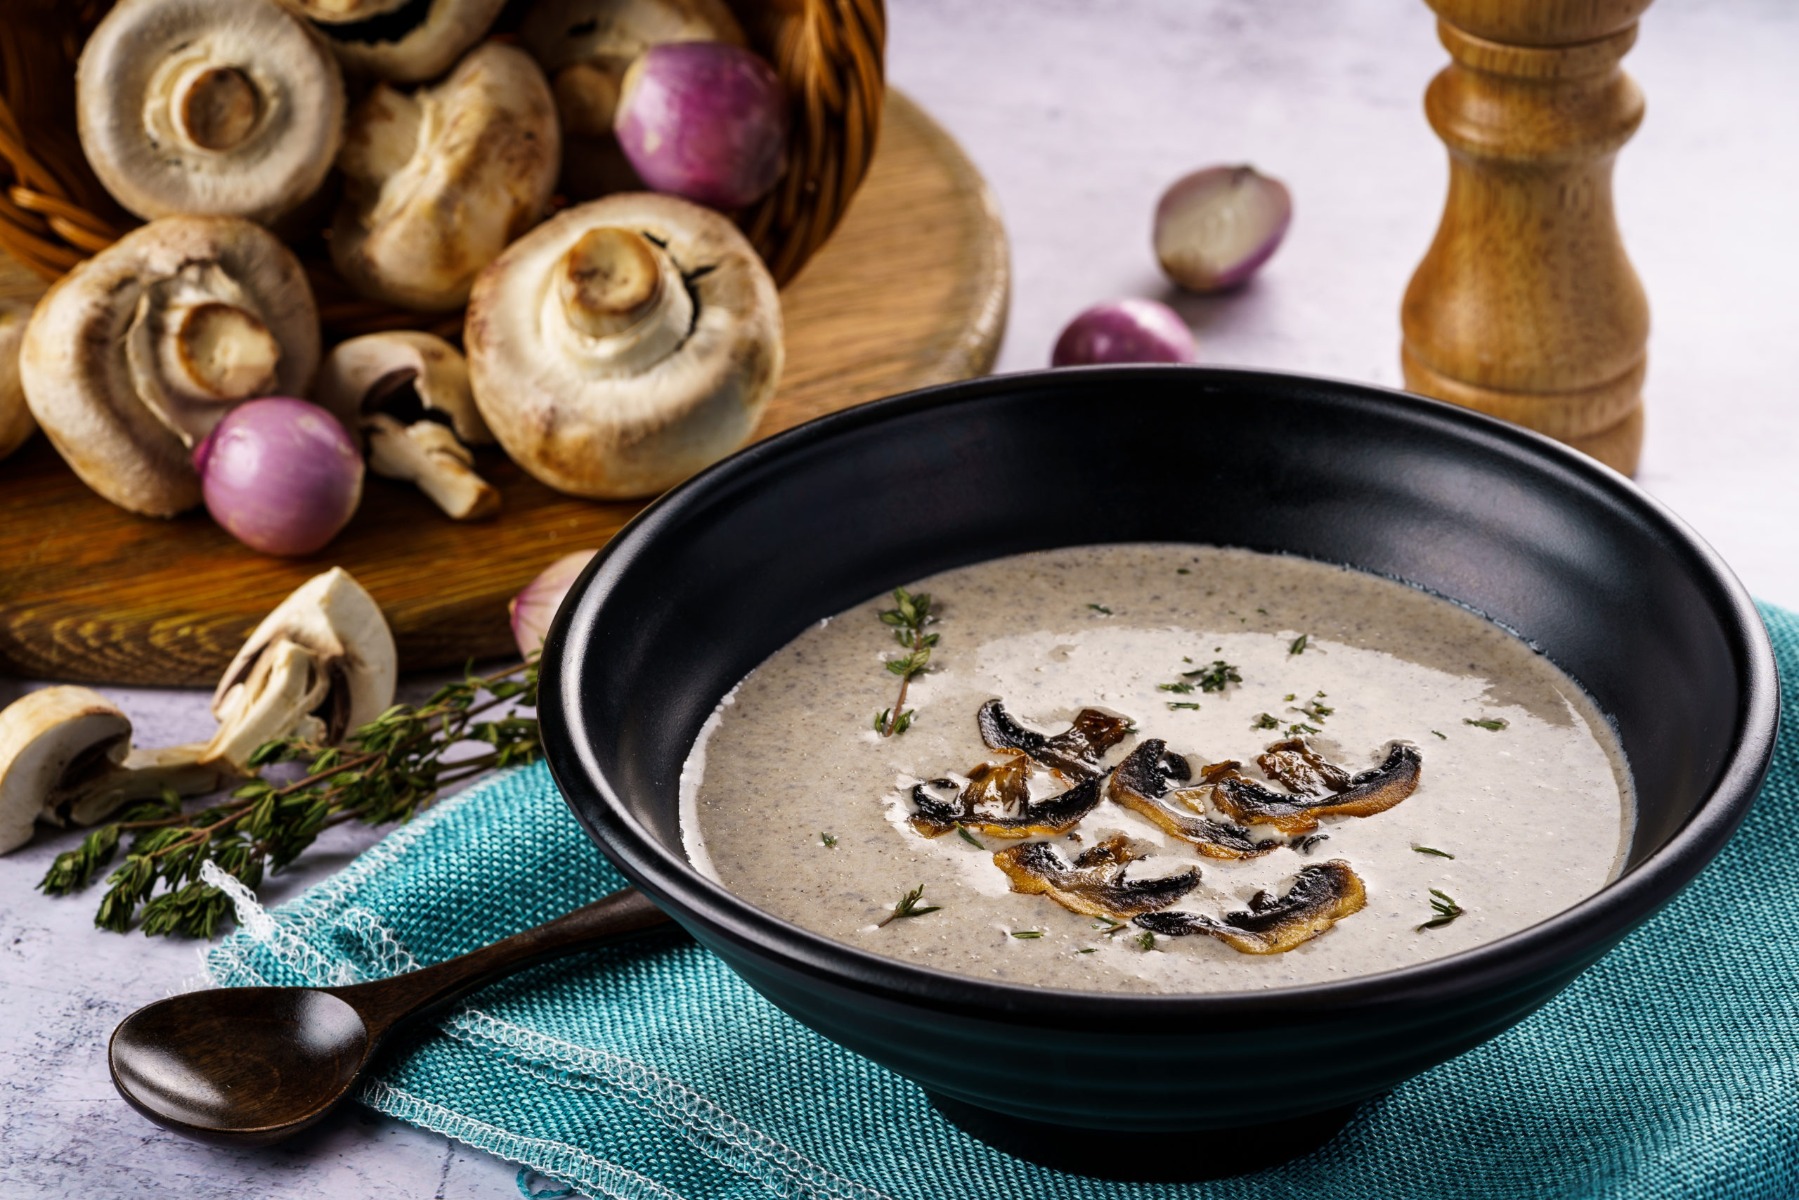 Rich, Earthy and Flavourful: Truffled Mushroom Soup